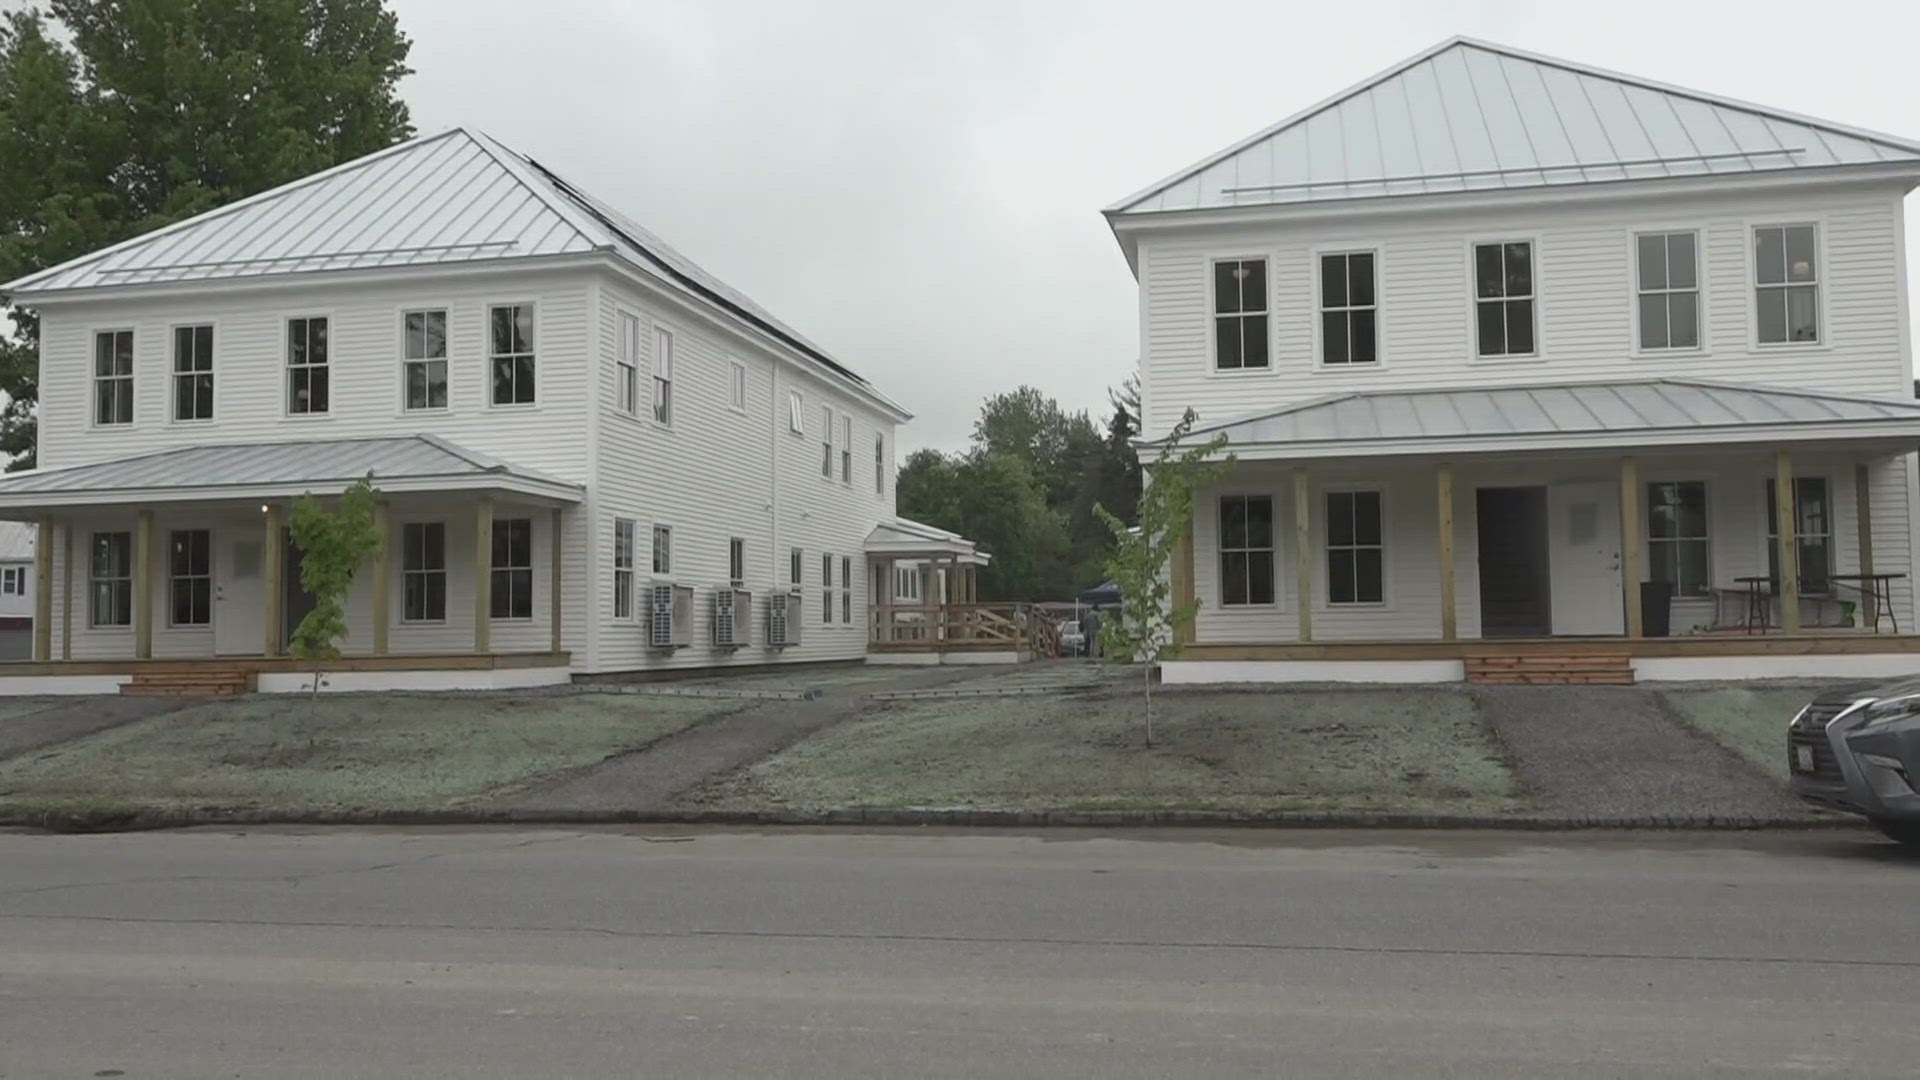 The project at 55 Weston Ave. features 18 apartments funded by MaineHousing's Rural Affordable Rental Housing Program.